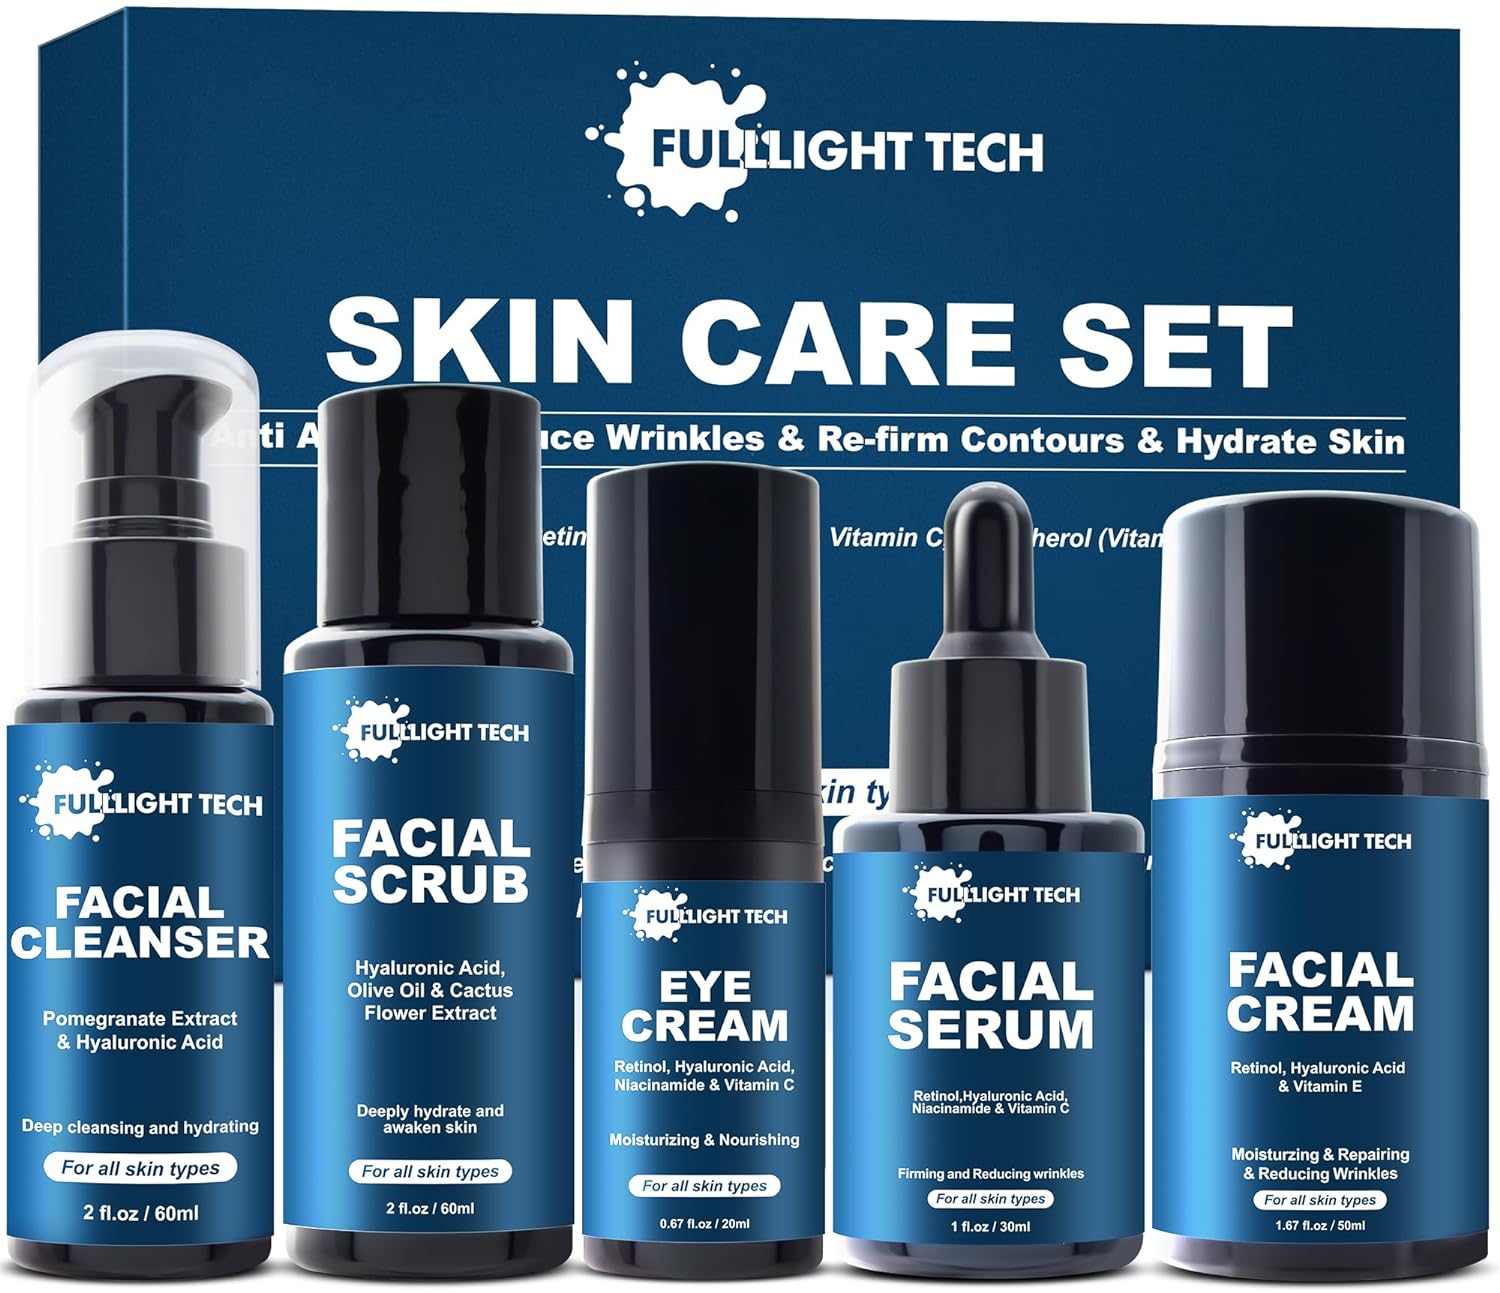 Gifts for Men,Mens Anti Aging Skin Care Kit,Reduce Wrinkles  Hydrate Skin w/Facial Cleanser,Scrub,Cream,Serum,Eye Cream Unique Men Gifts Stocking Stuffers for Christmas,Gift for Him Boyfriend Husband